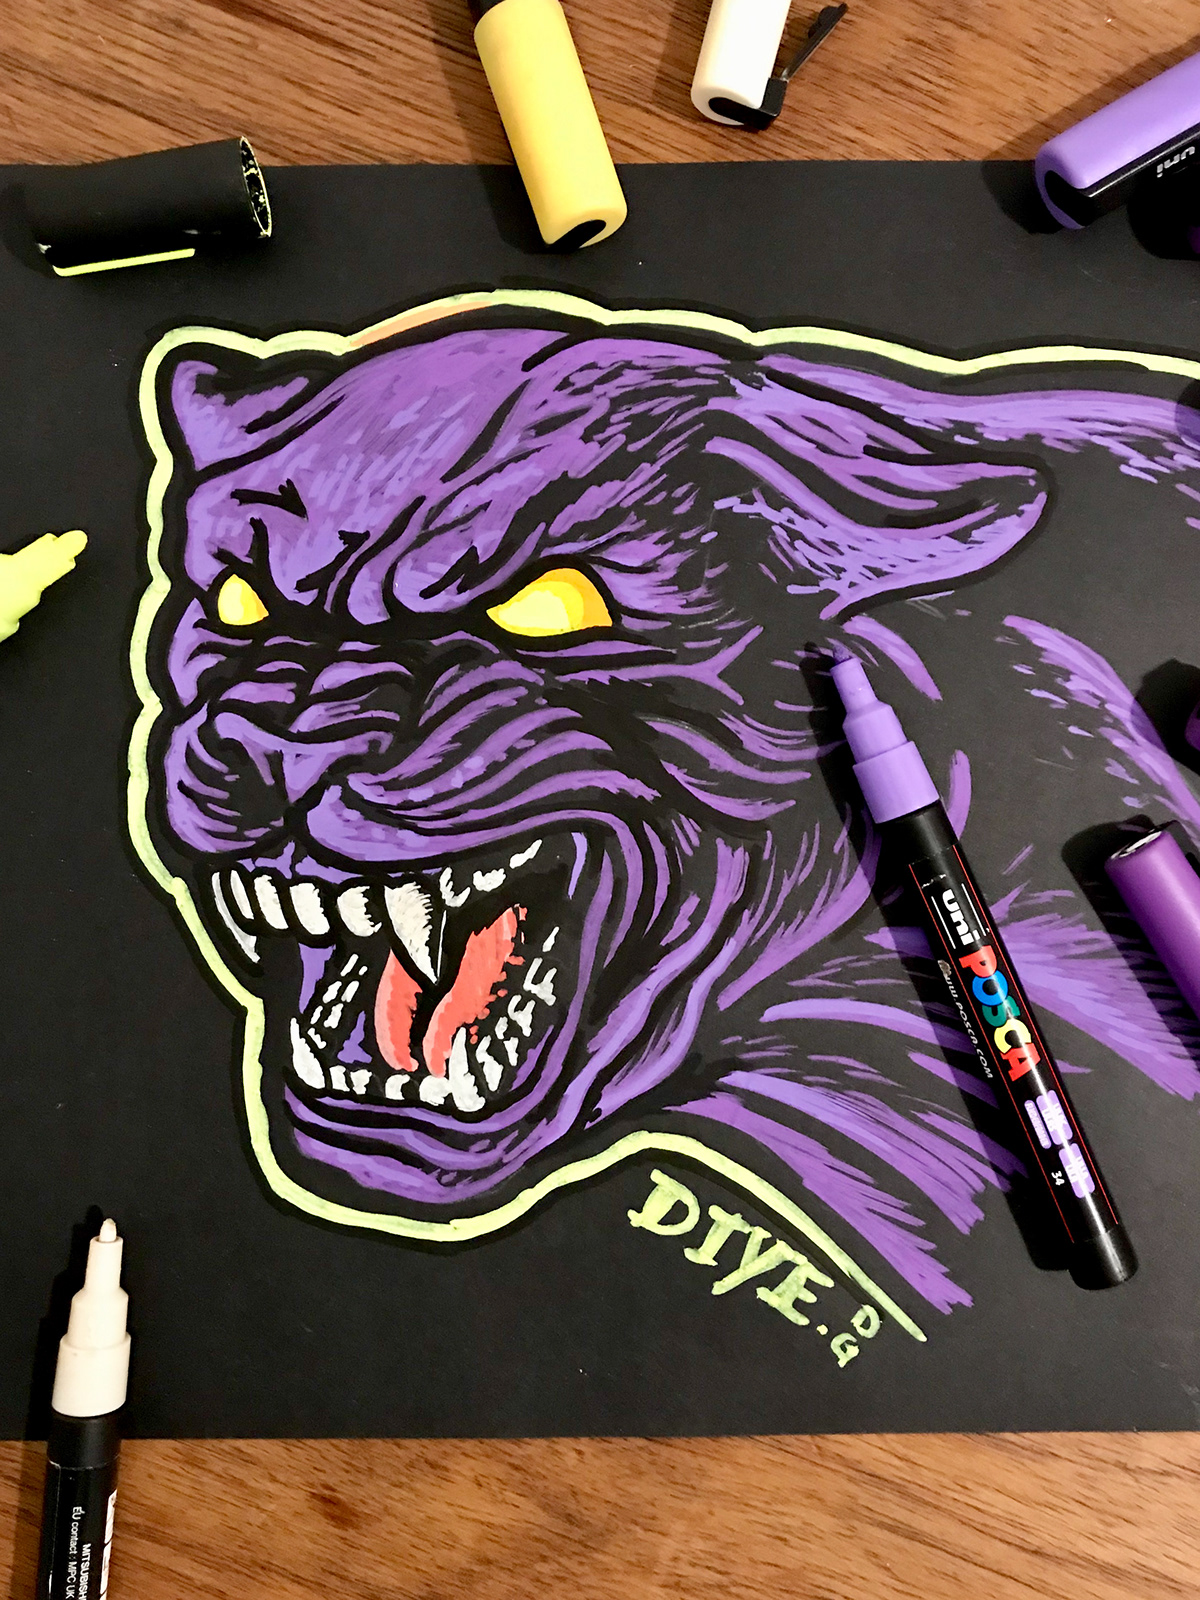 BLACK PANTHER - Posca markers on Behance